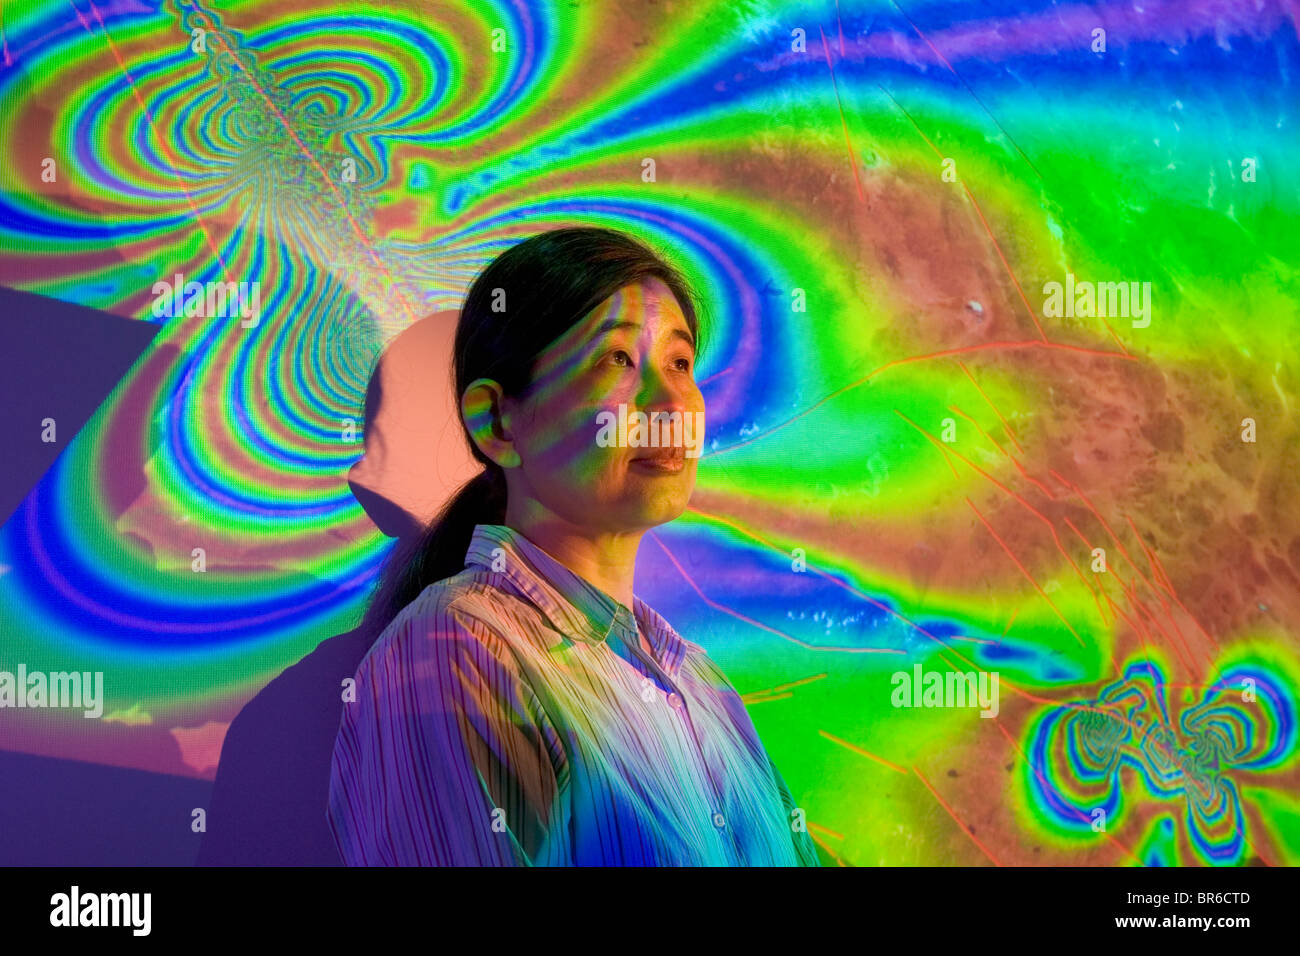 A woman and an earthquake graphic. Stock Photo